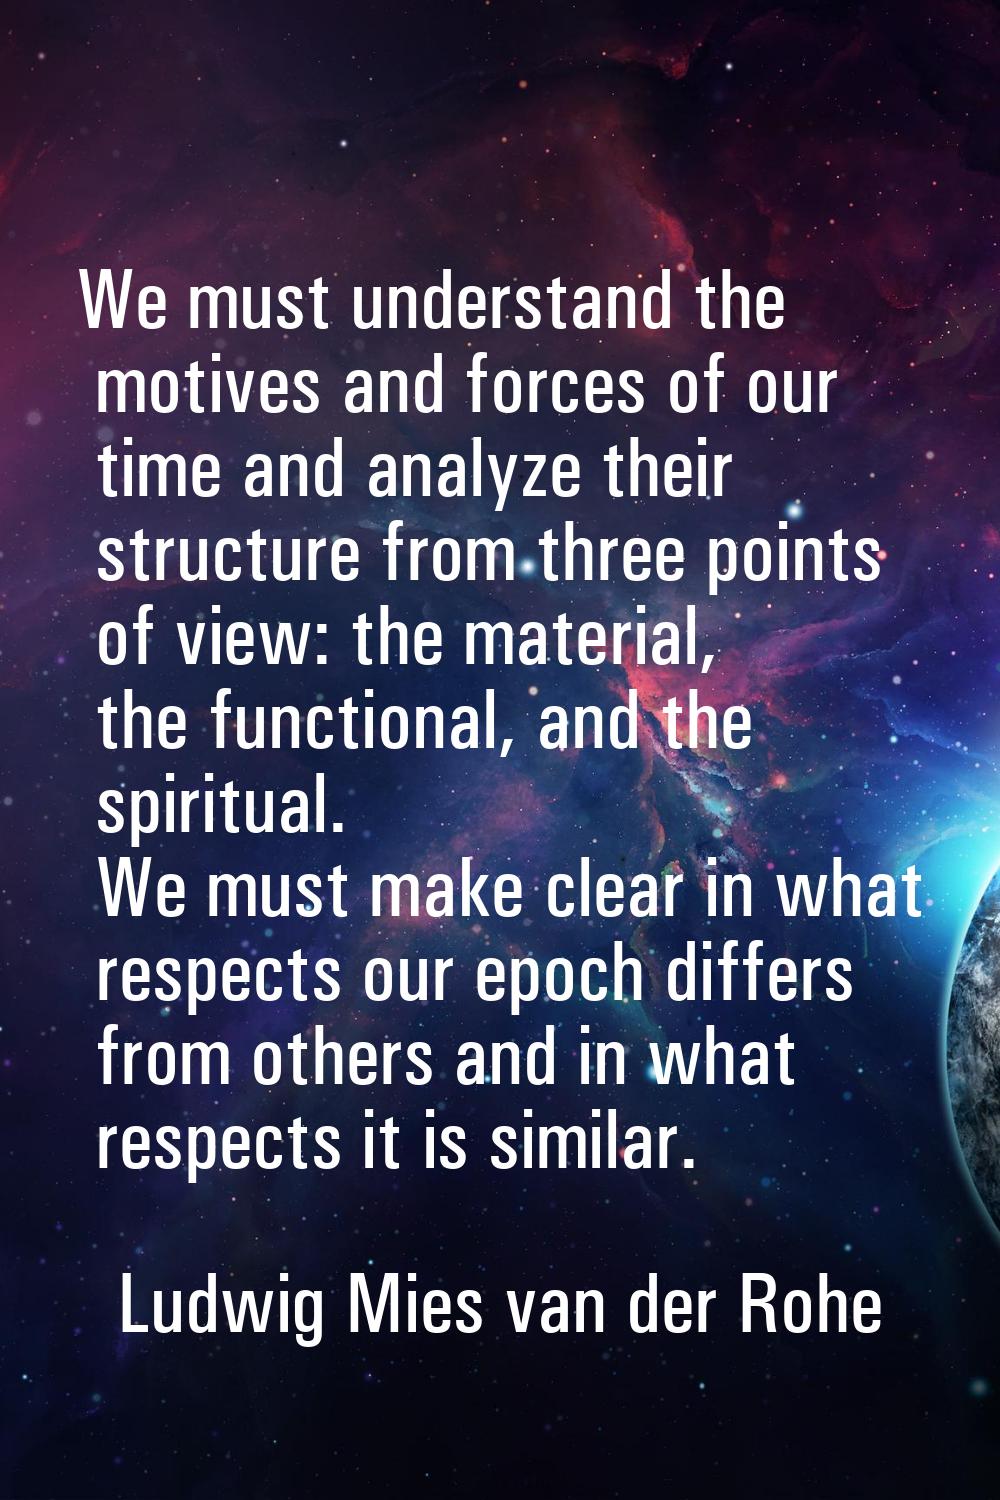 We must understand the motives and forces of our time and analyze their structure from three points